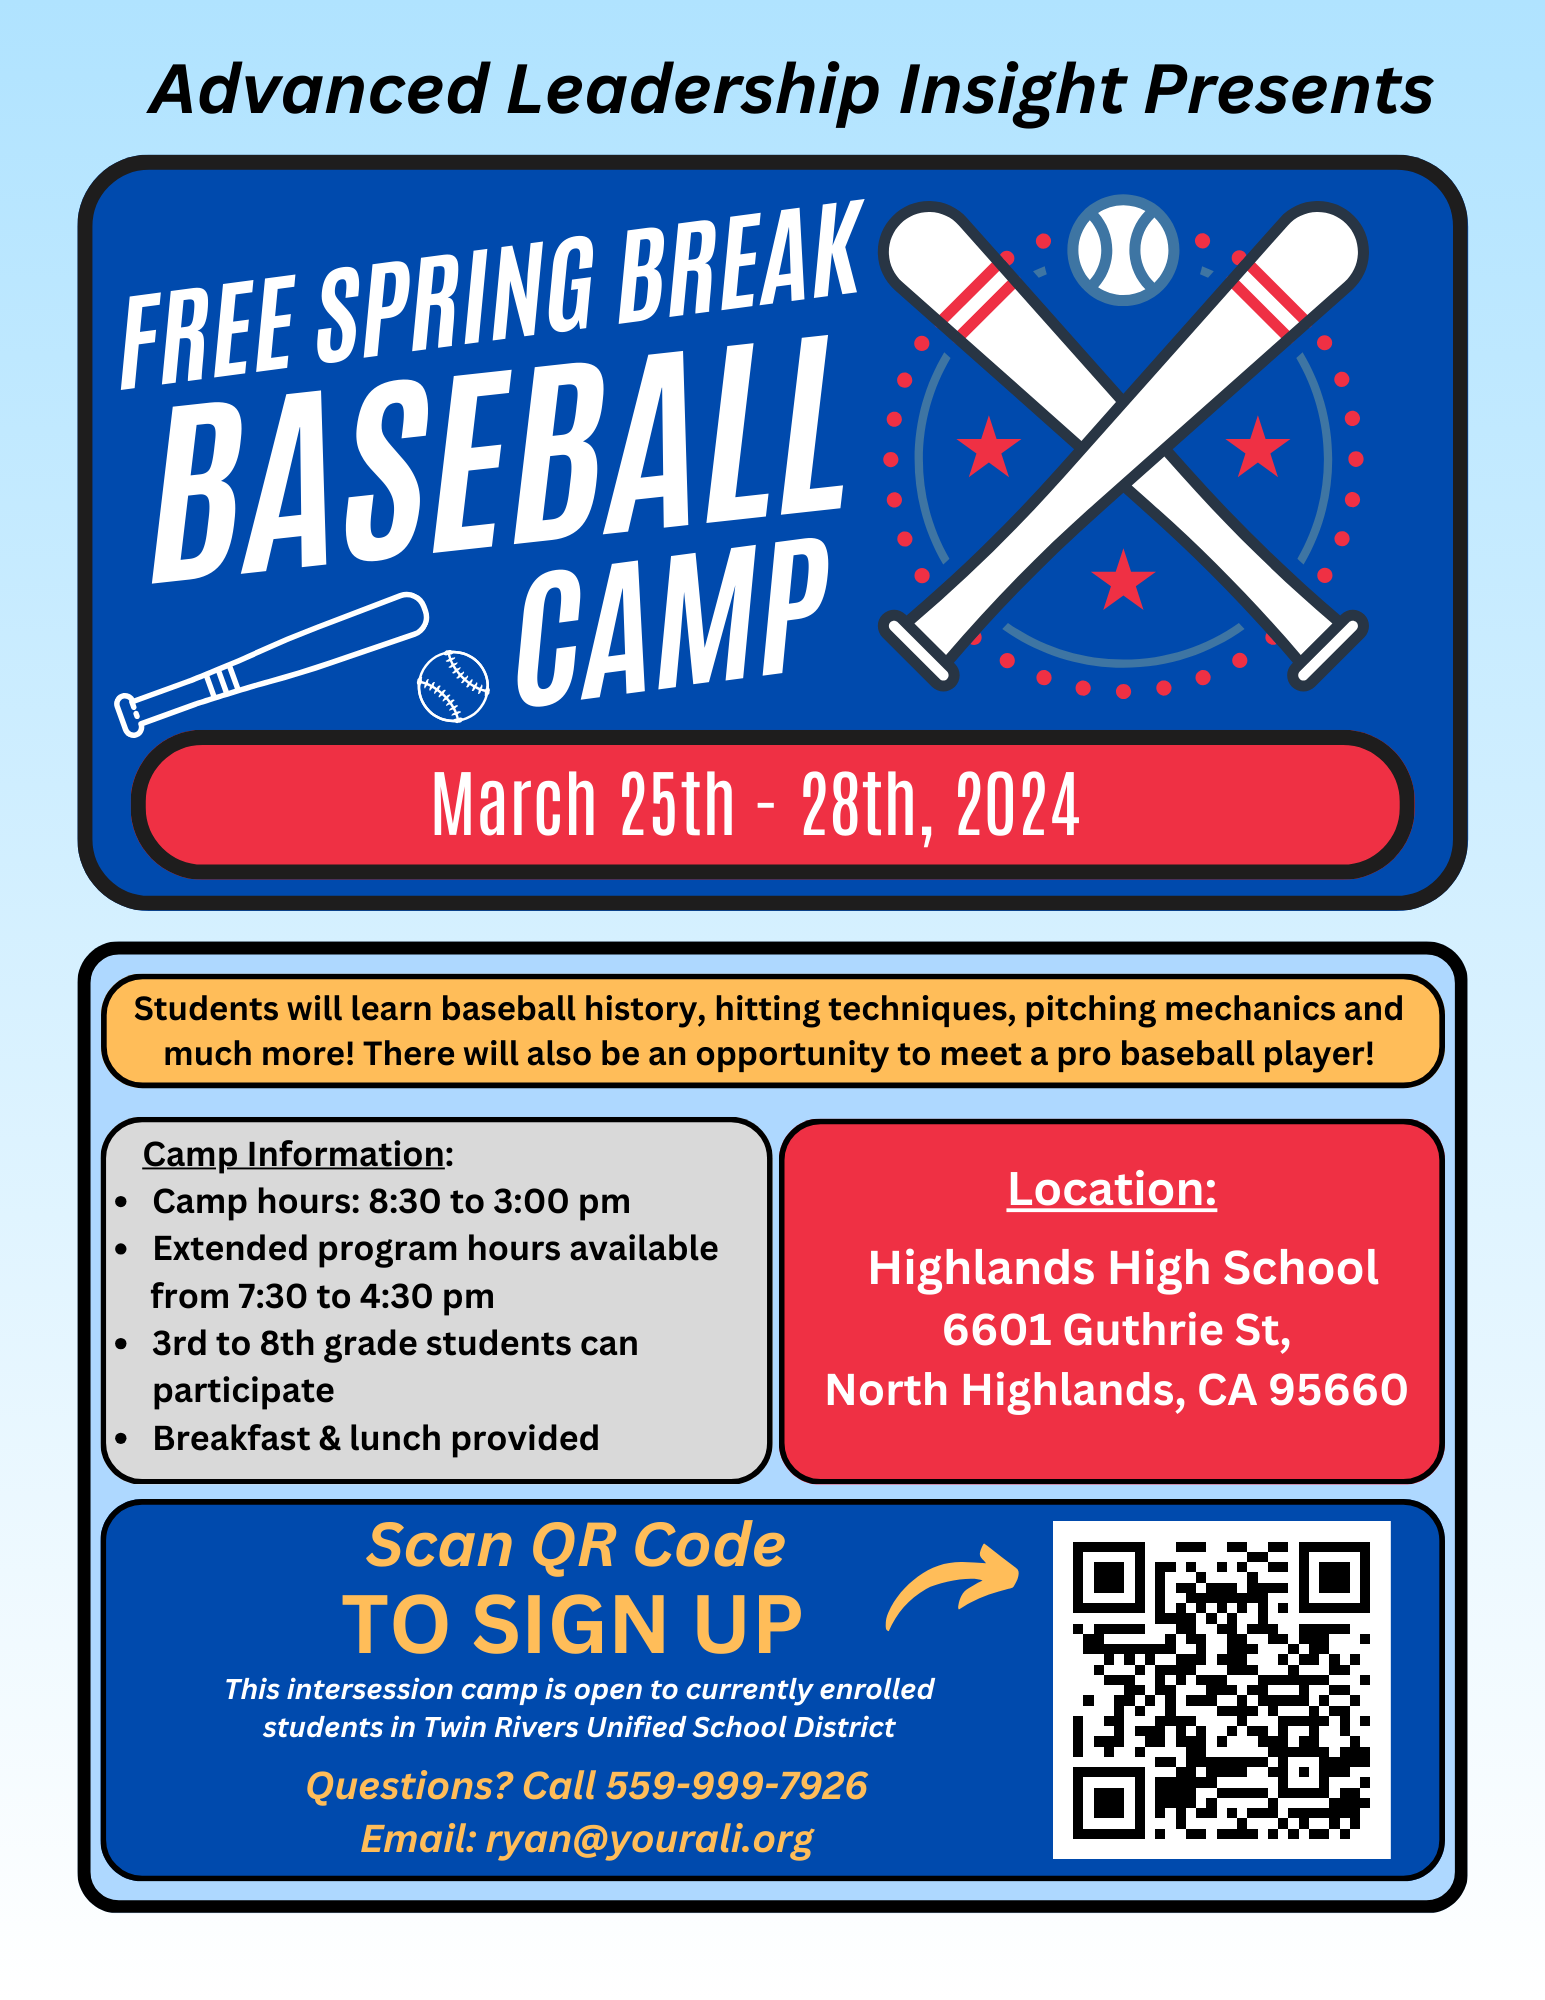 Advanced Leadership Insight Spring Break Baseball Camp Flyer. December 27, 2022 - January 5, 2023. 8:30 am to 4:30 pm. Register Below. Call 559-999-7926 for more information.